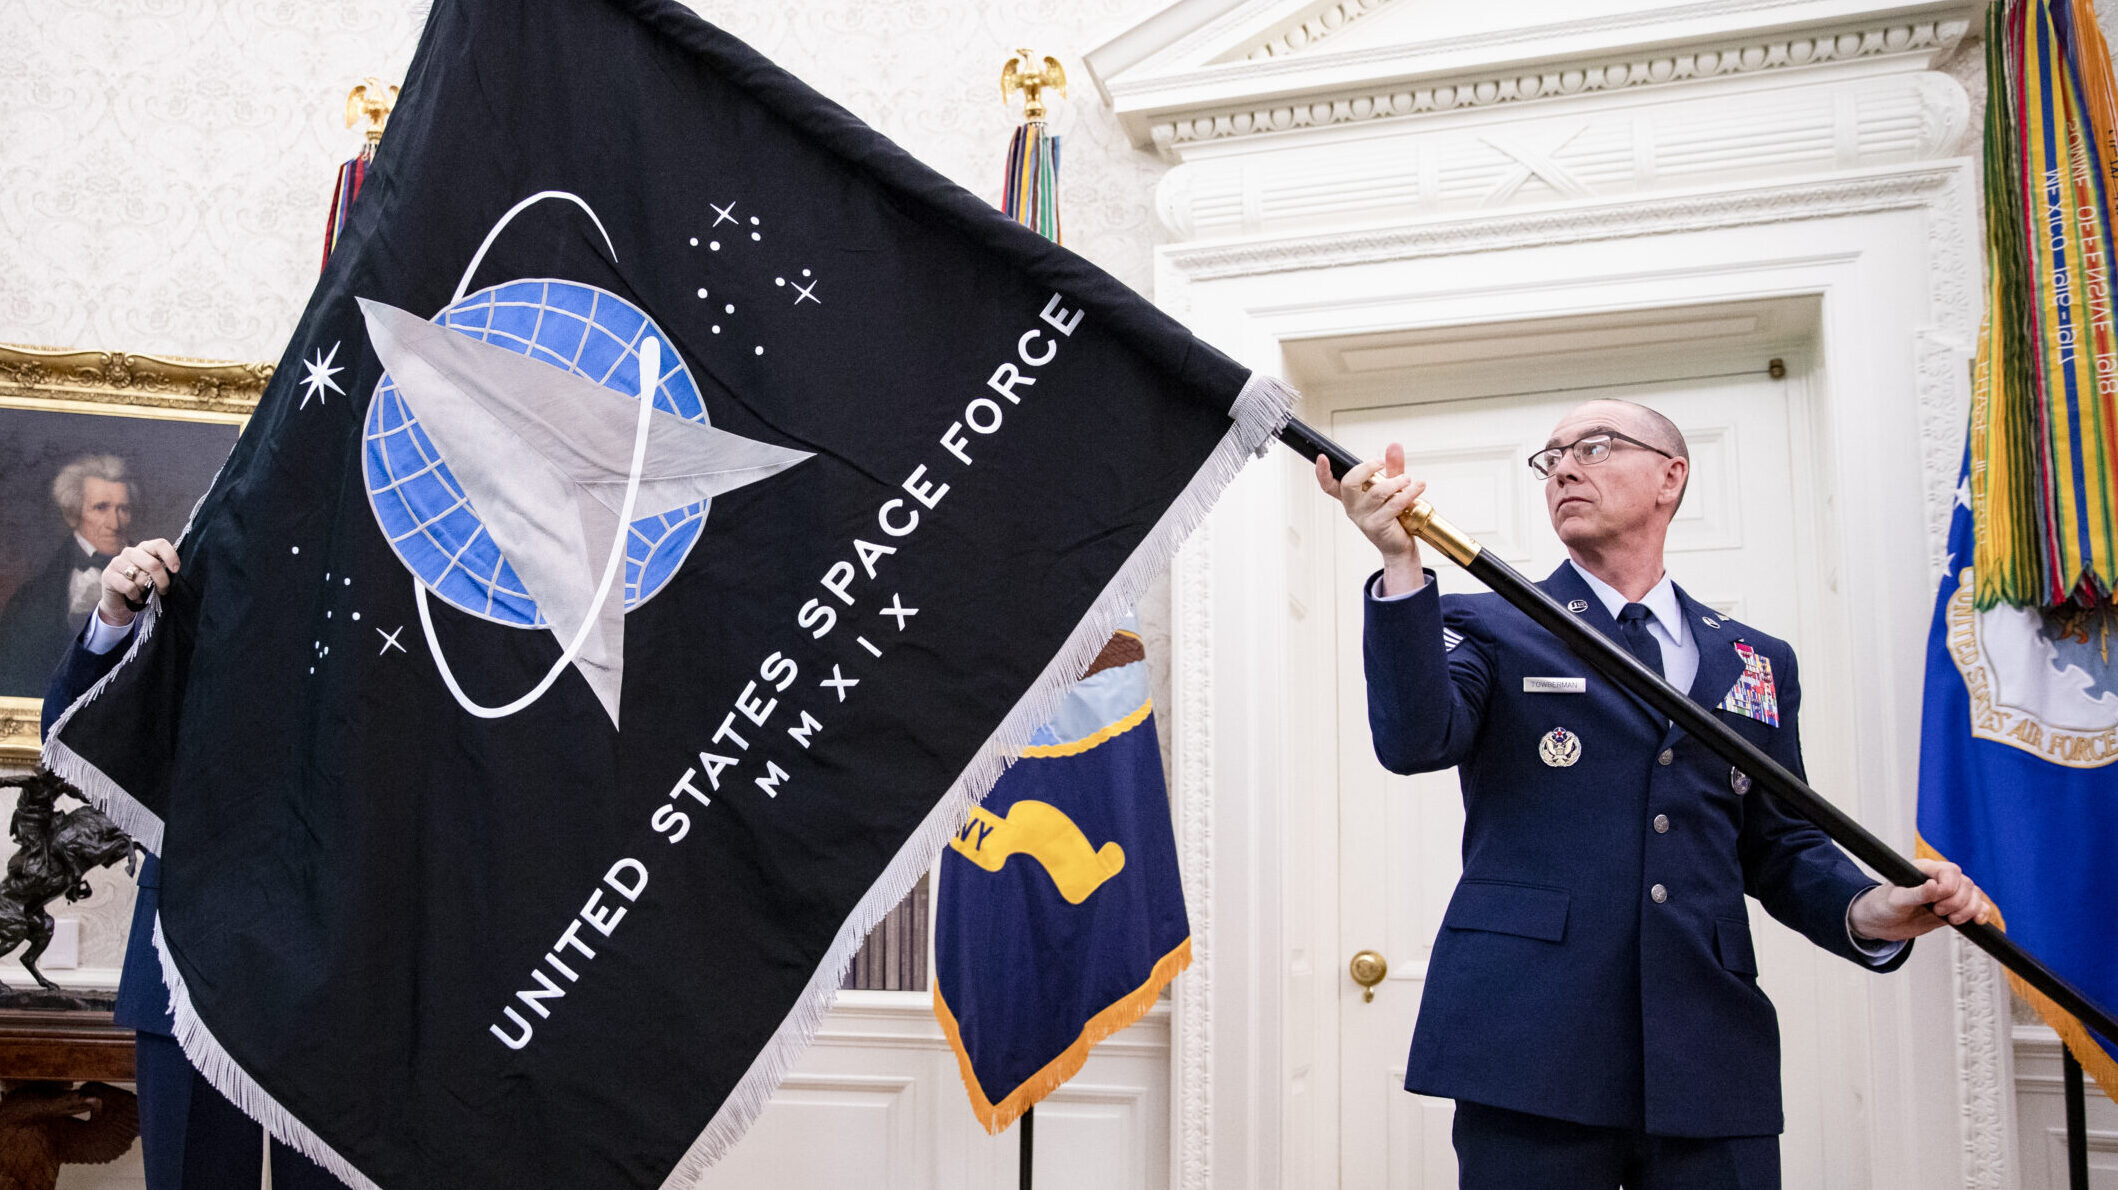 President Trump Signs An Armed Forces Day Proclamation And Participates In U.S. Space Force Flag Presentation